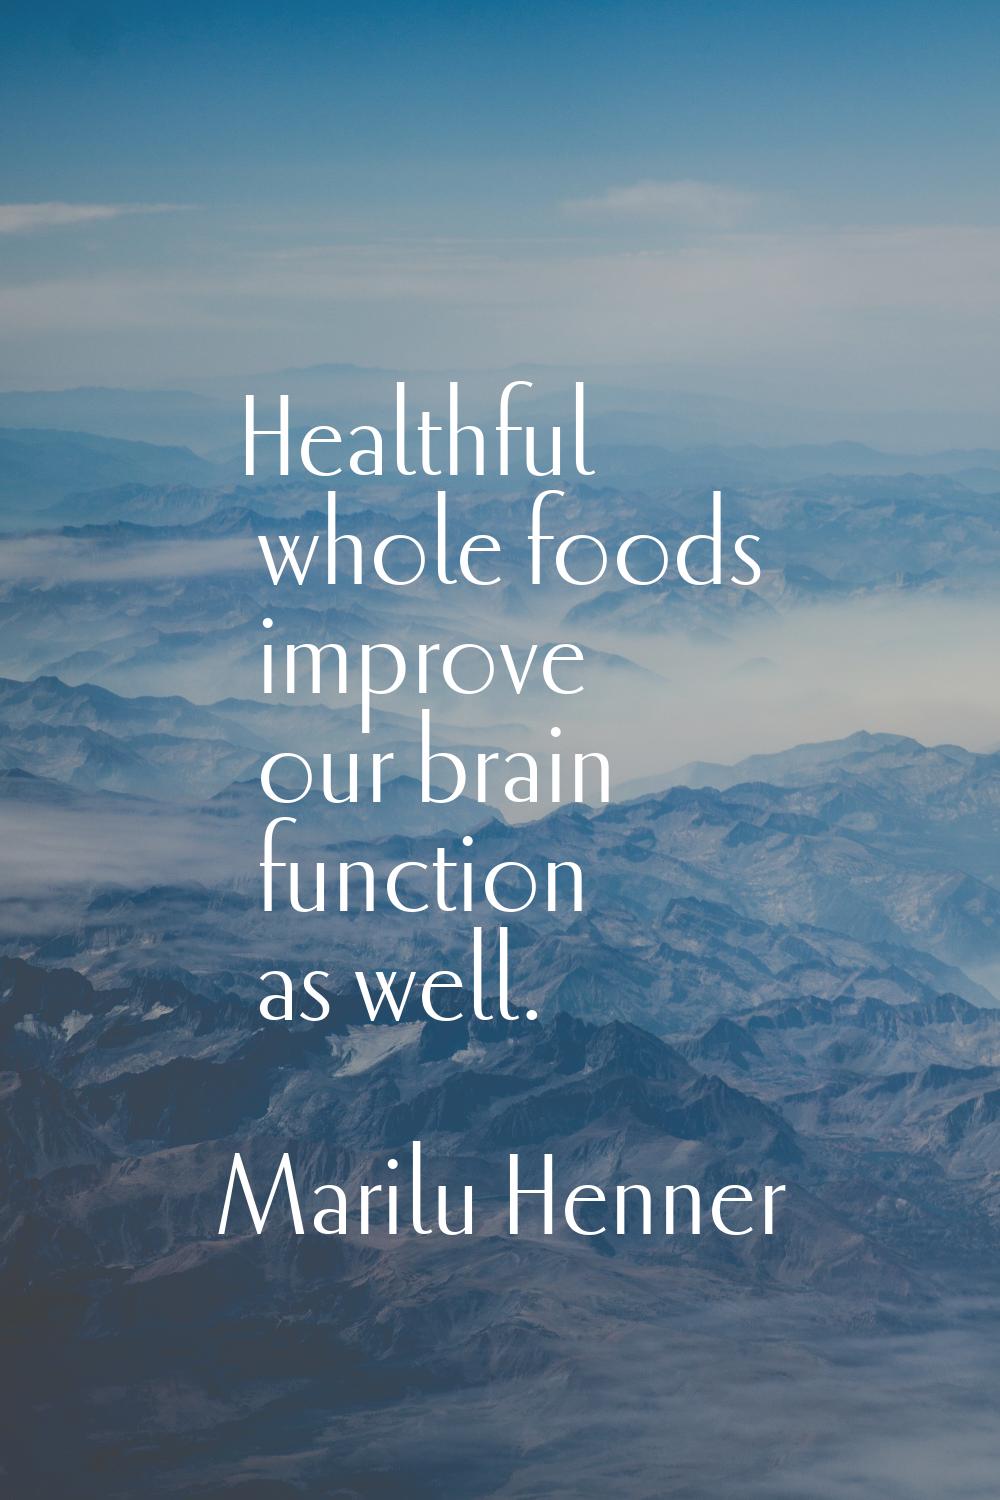 Healthful whole foods improve our brain function as well.